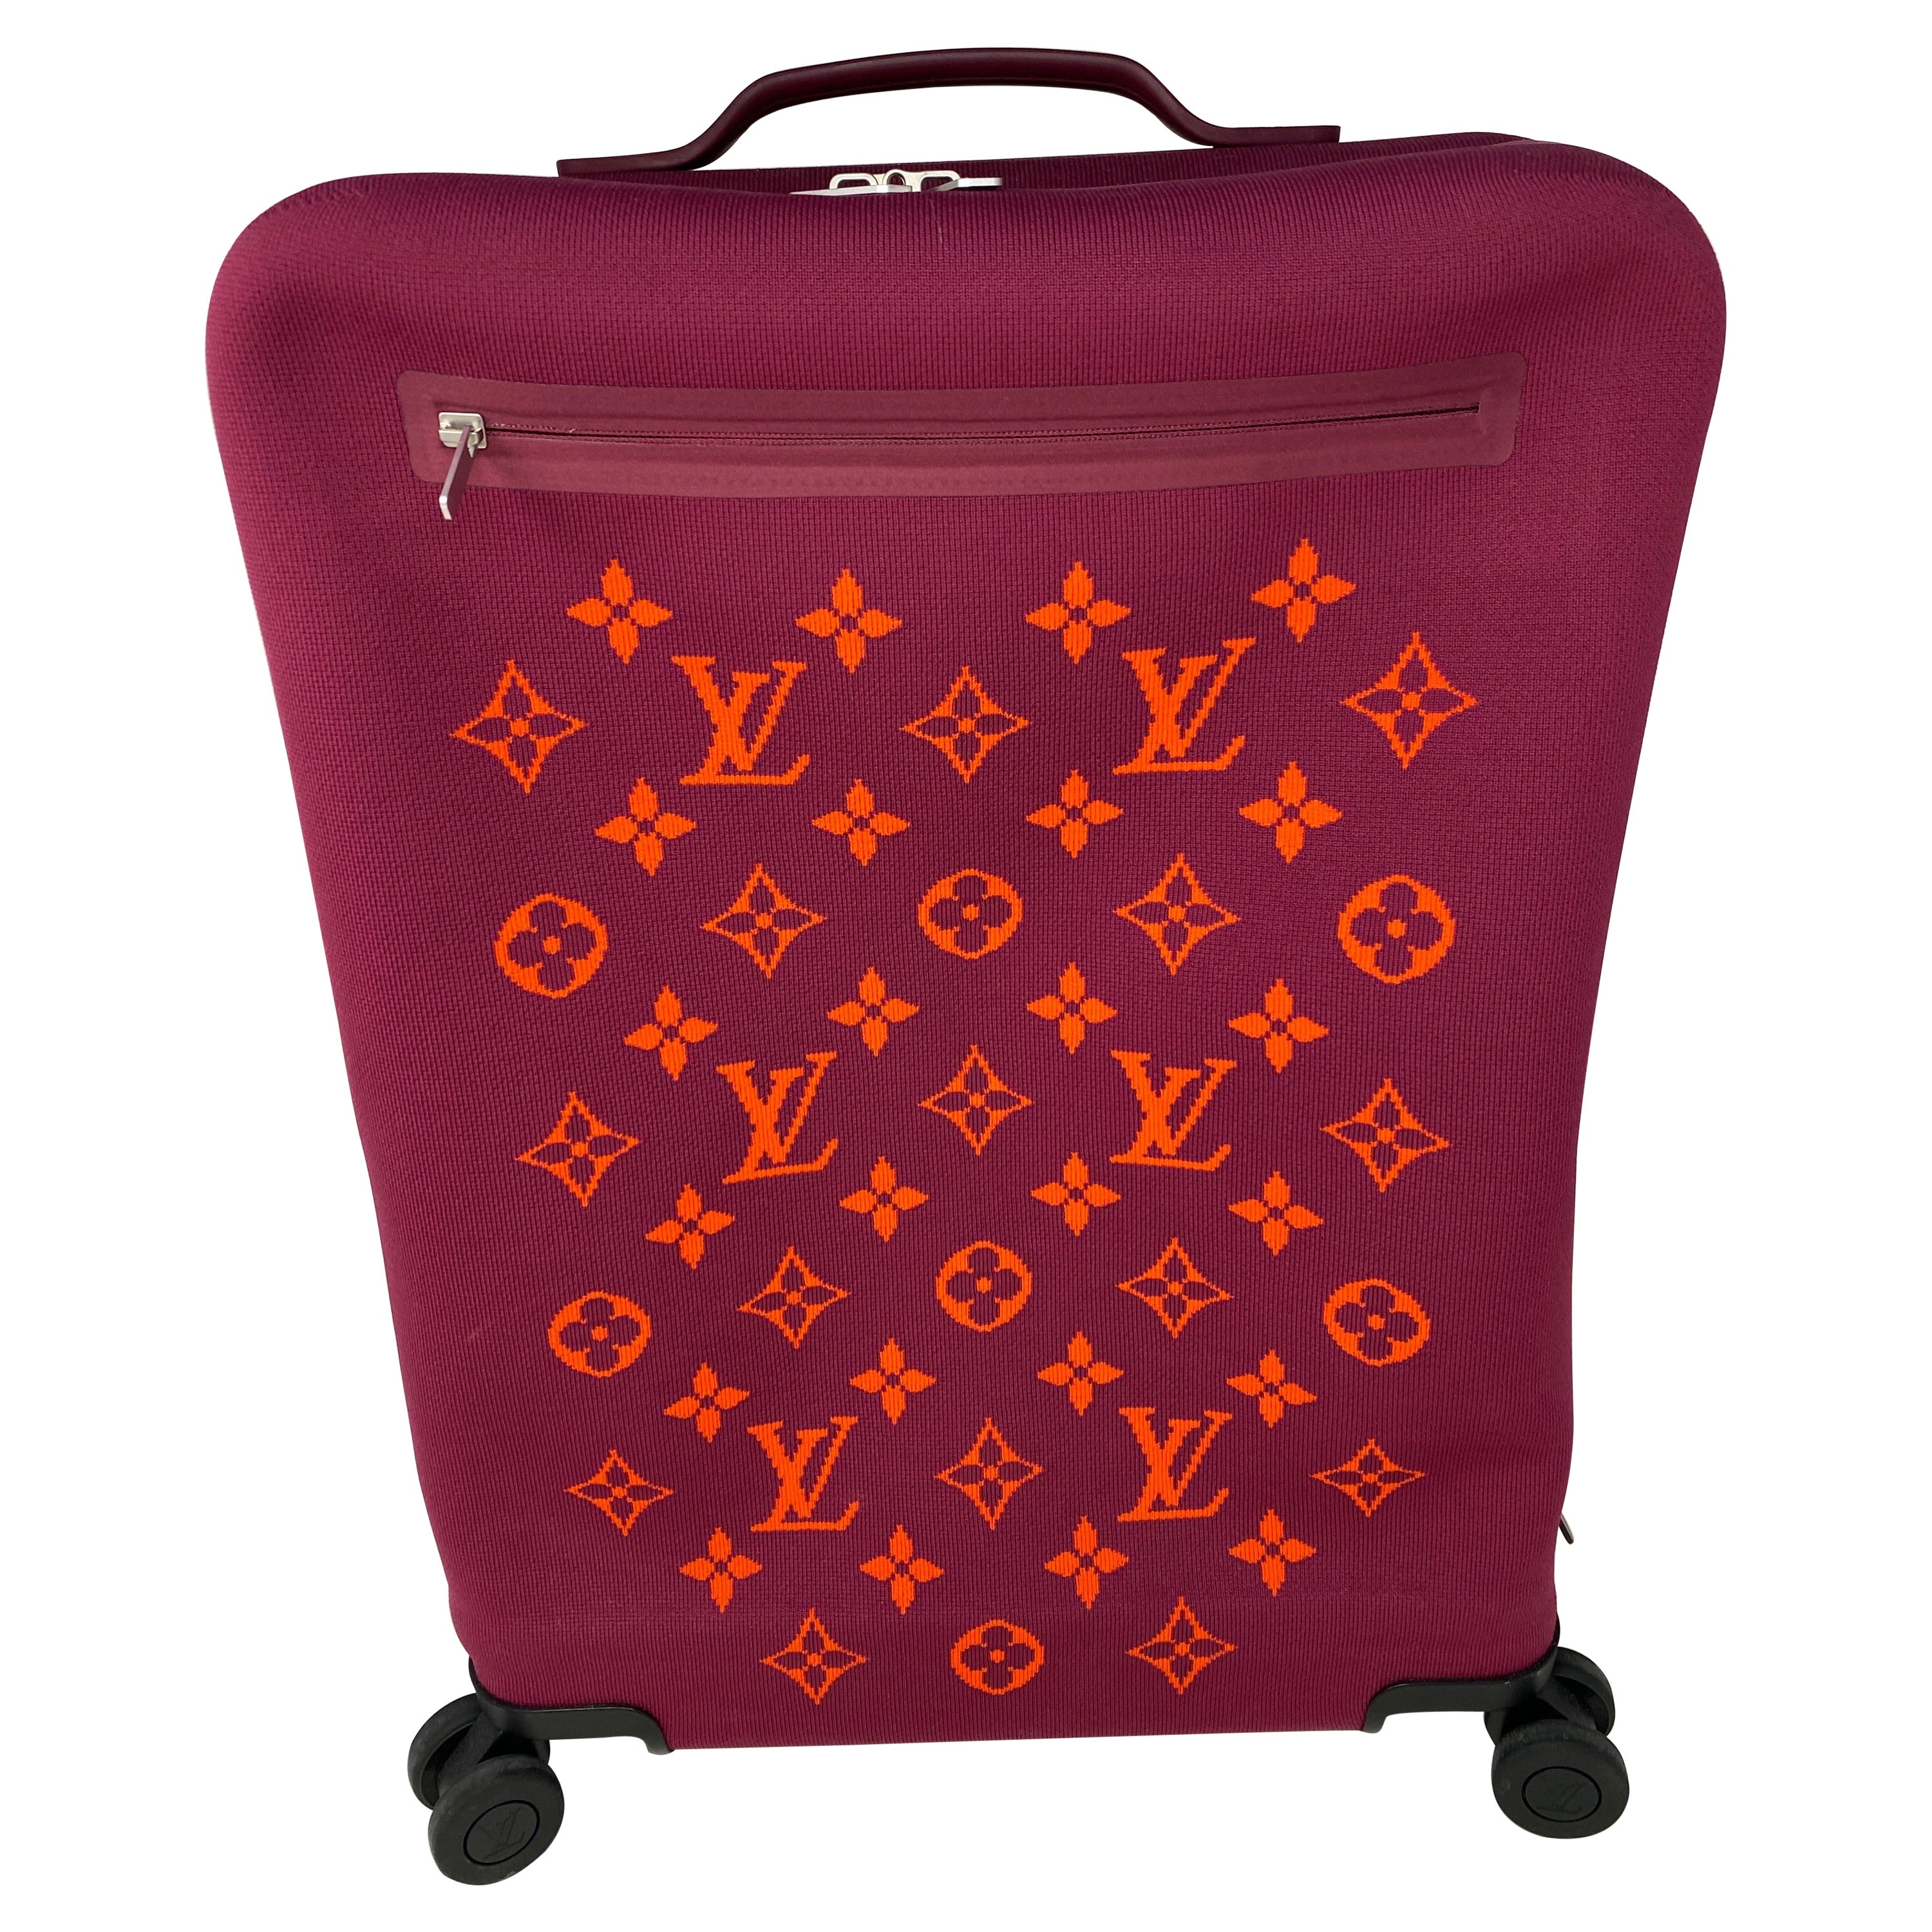 Louis Vuitton Limited Edition Roller Suitcase